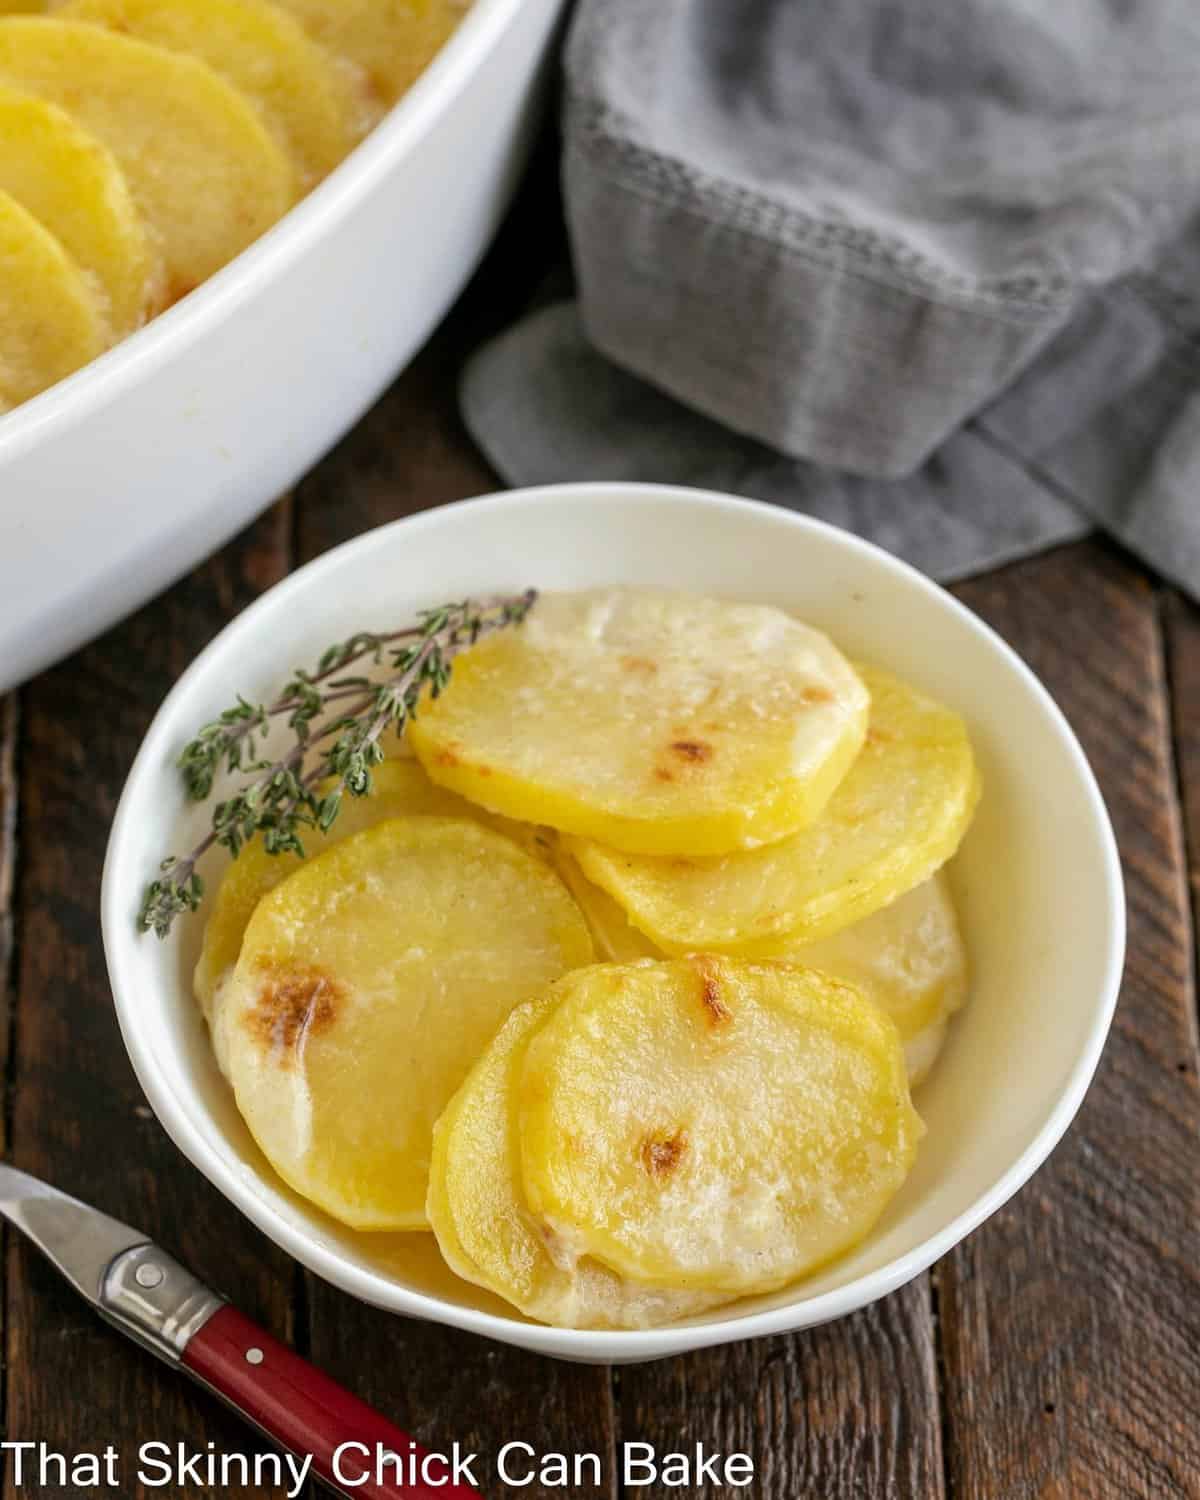 Close view of  a small bowl of scalloped potatoes next to the casserole dish.